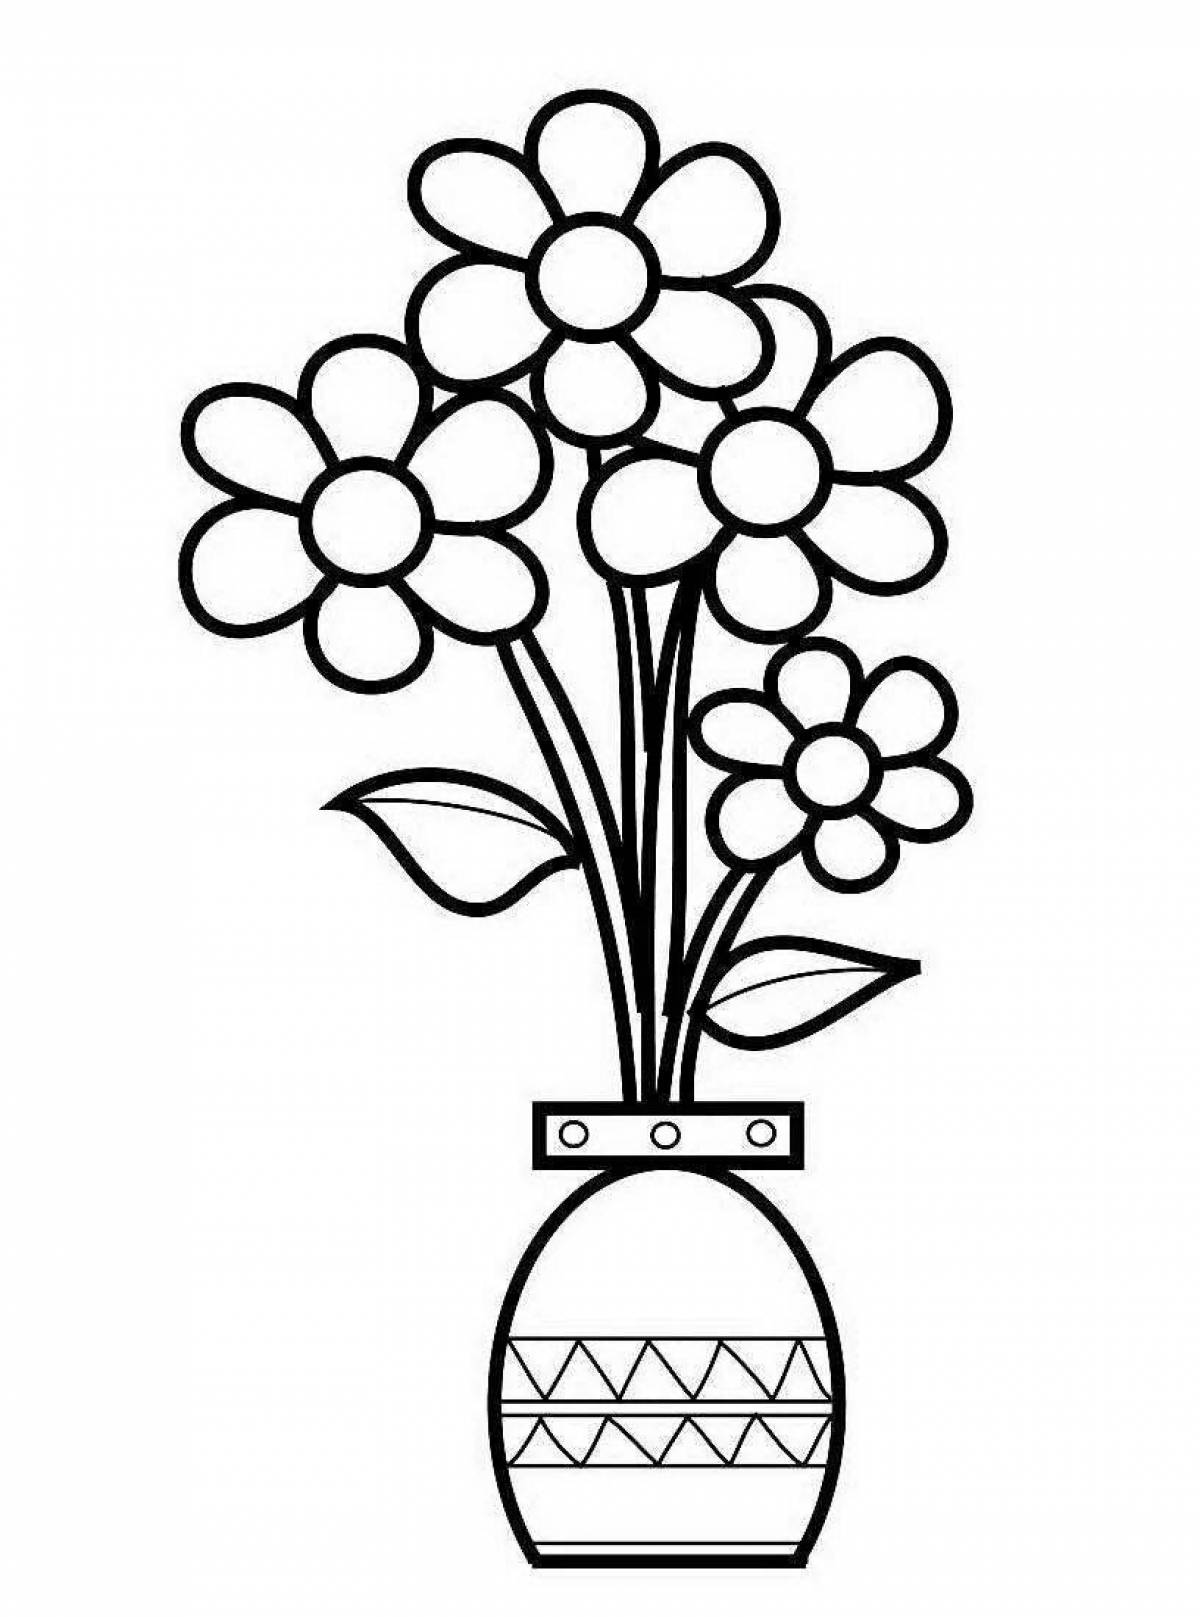 Playful vase of flowers coloring book for children